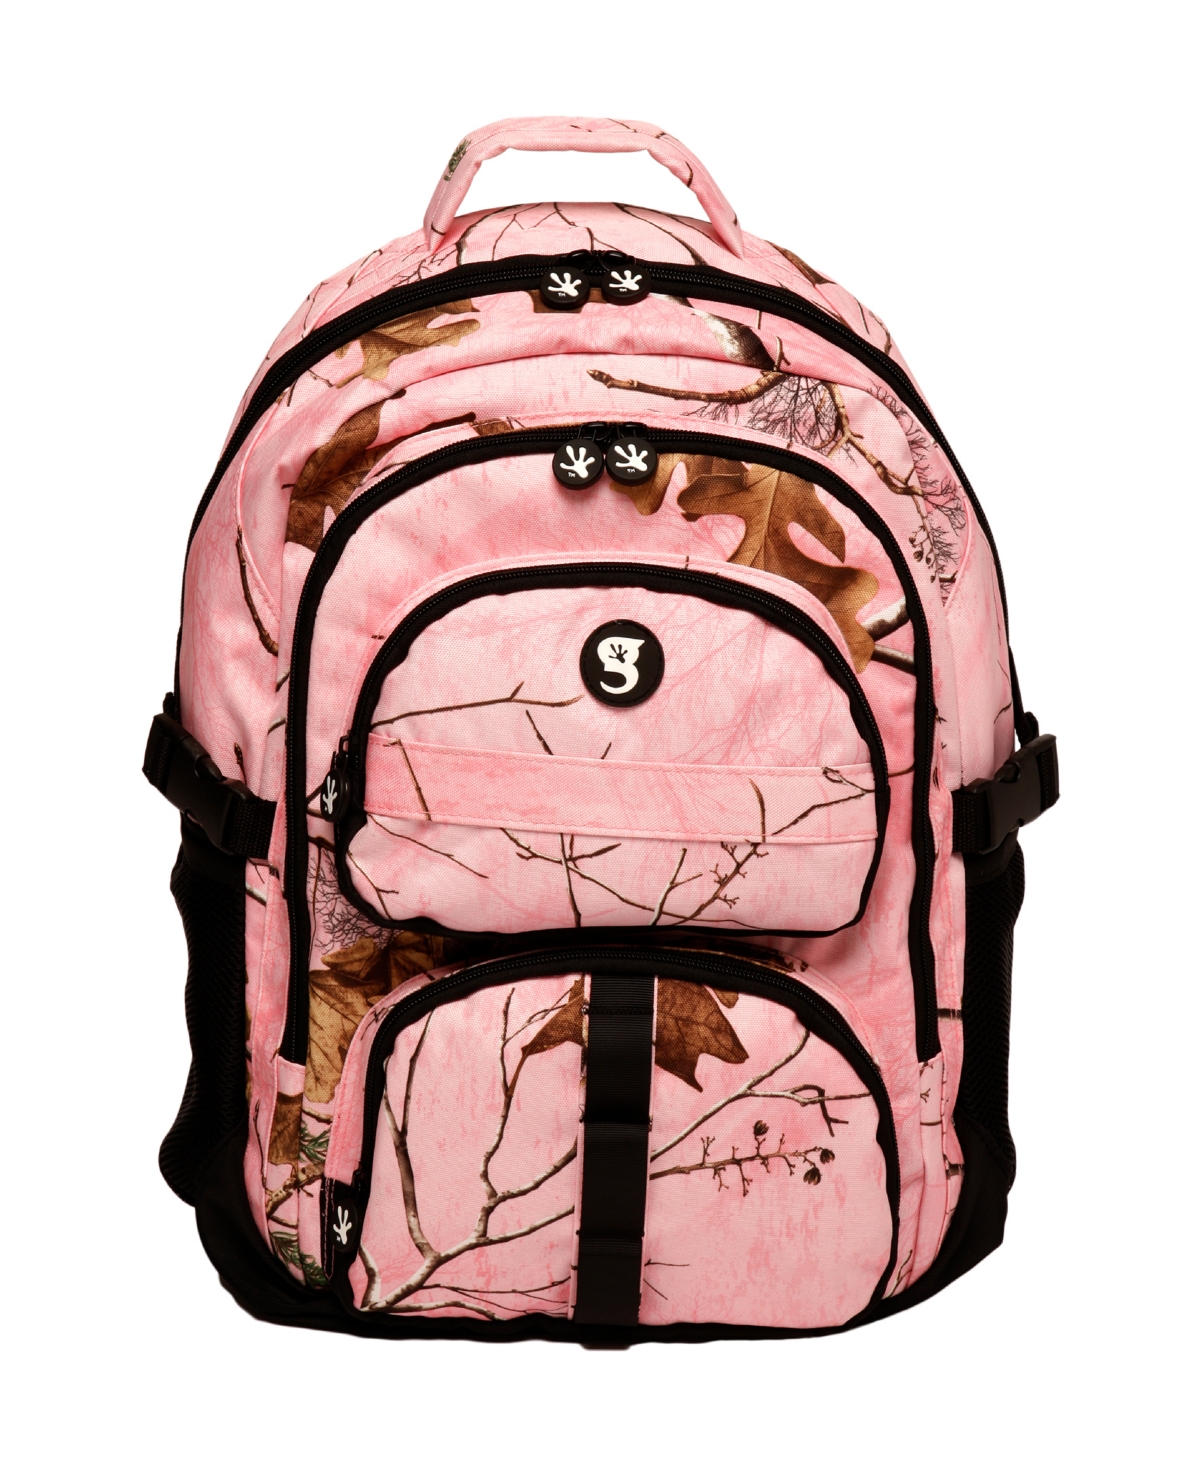 Optivate RT18 Backpack - Realtree Pink Camo